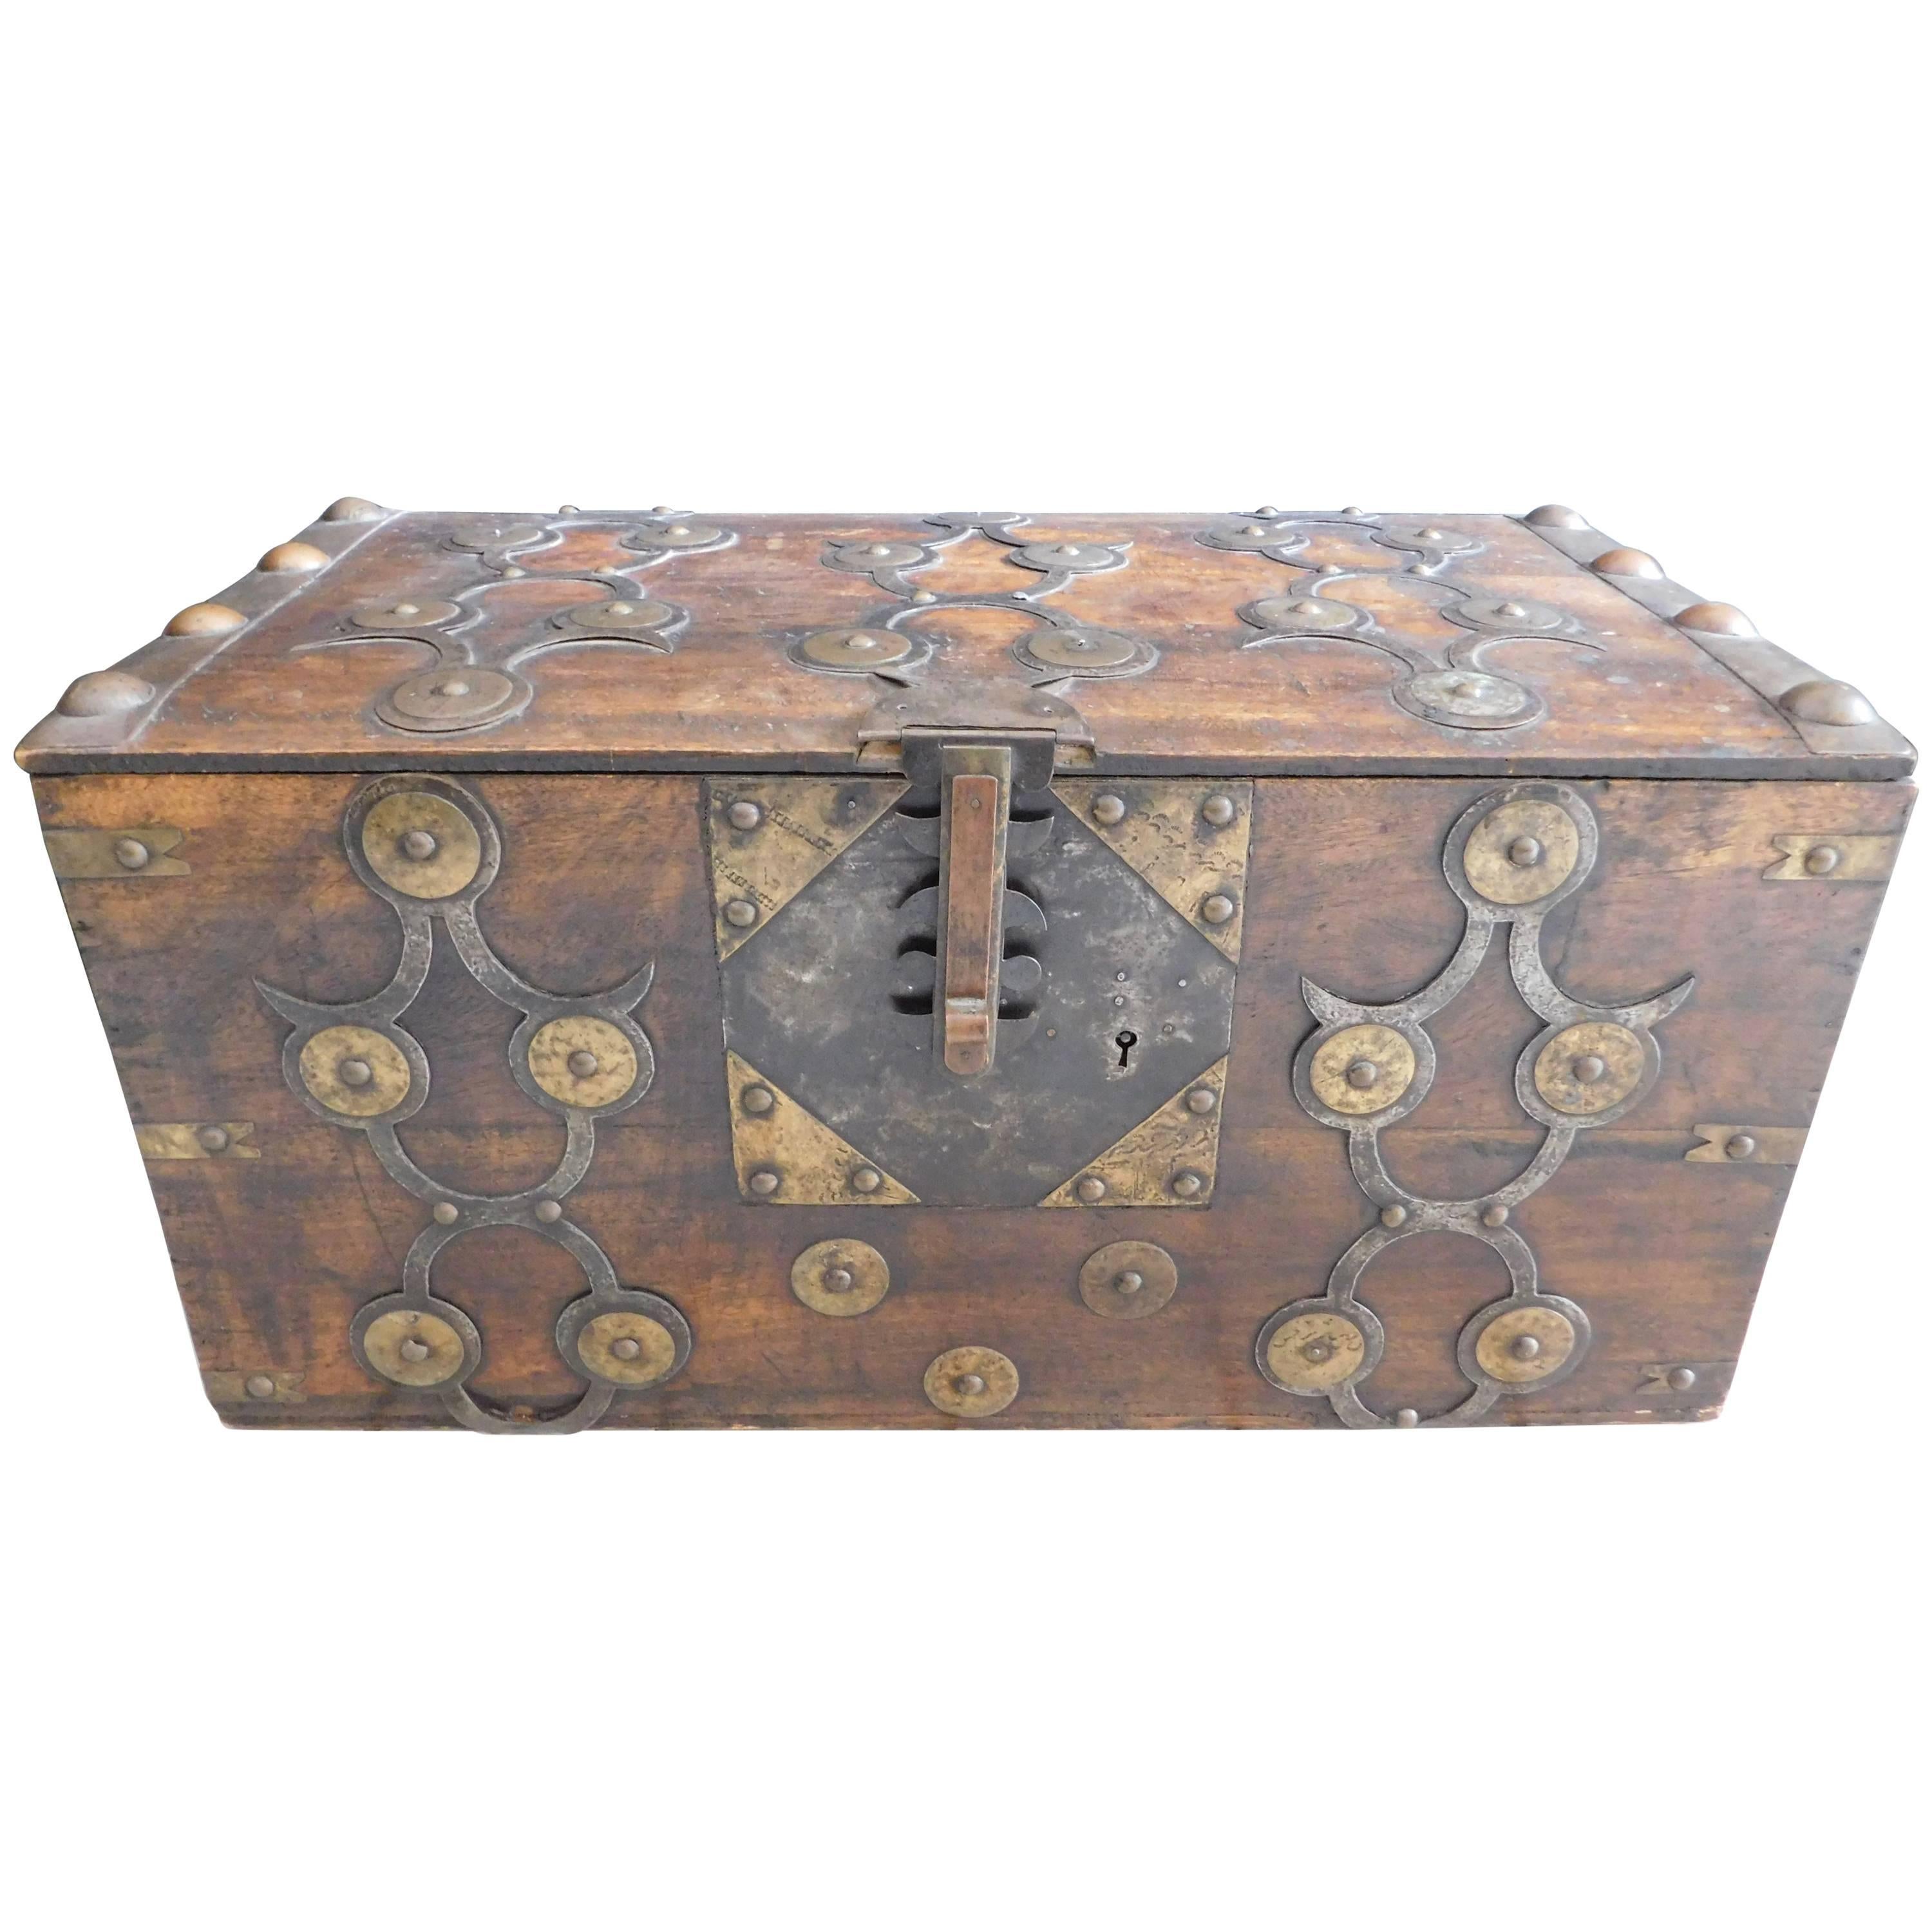 19th Century Anglo Indian NauticaSea Trunk with Brass and Iron Decorative Mounts